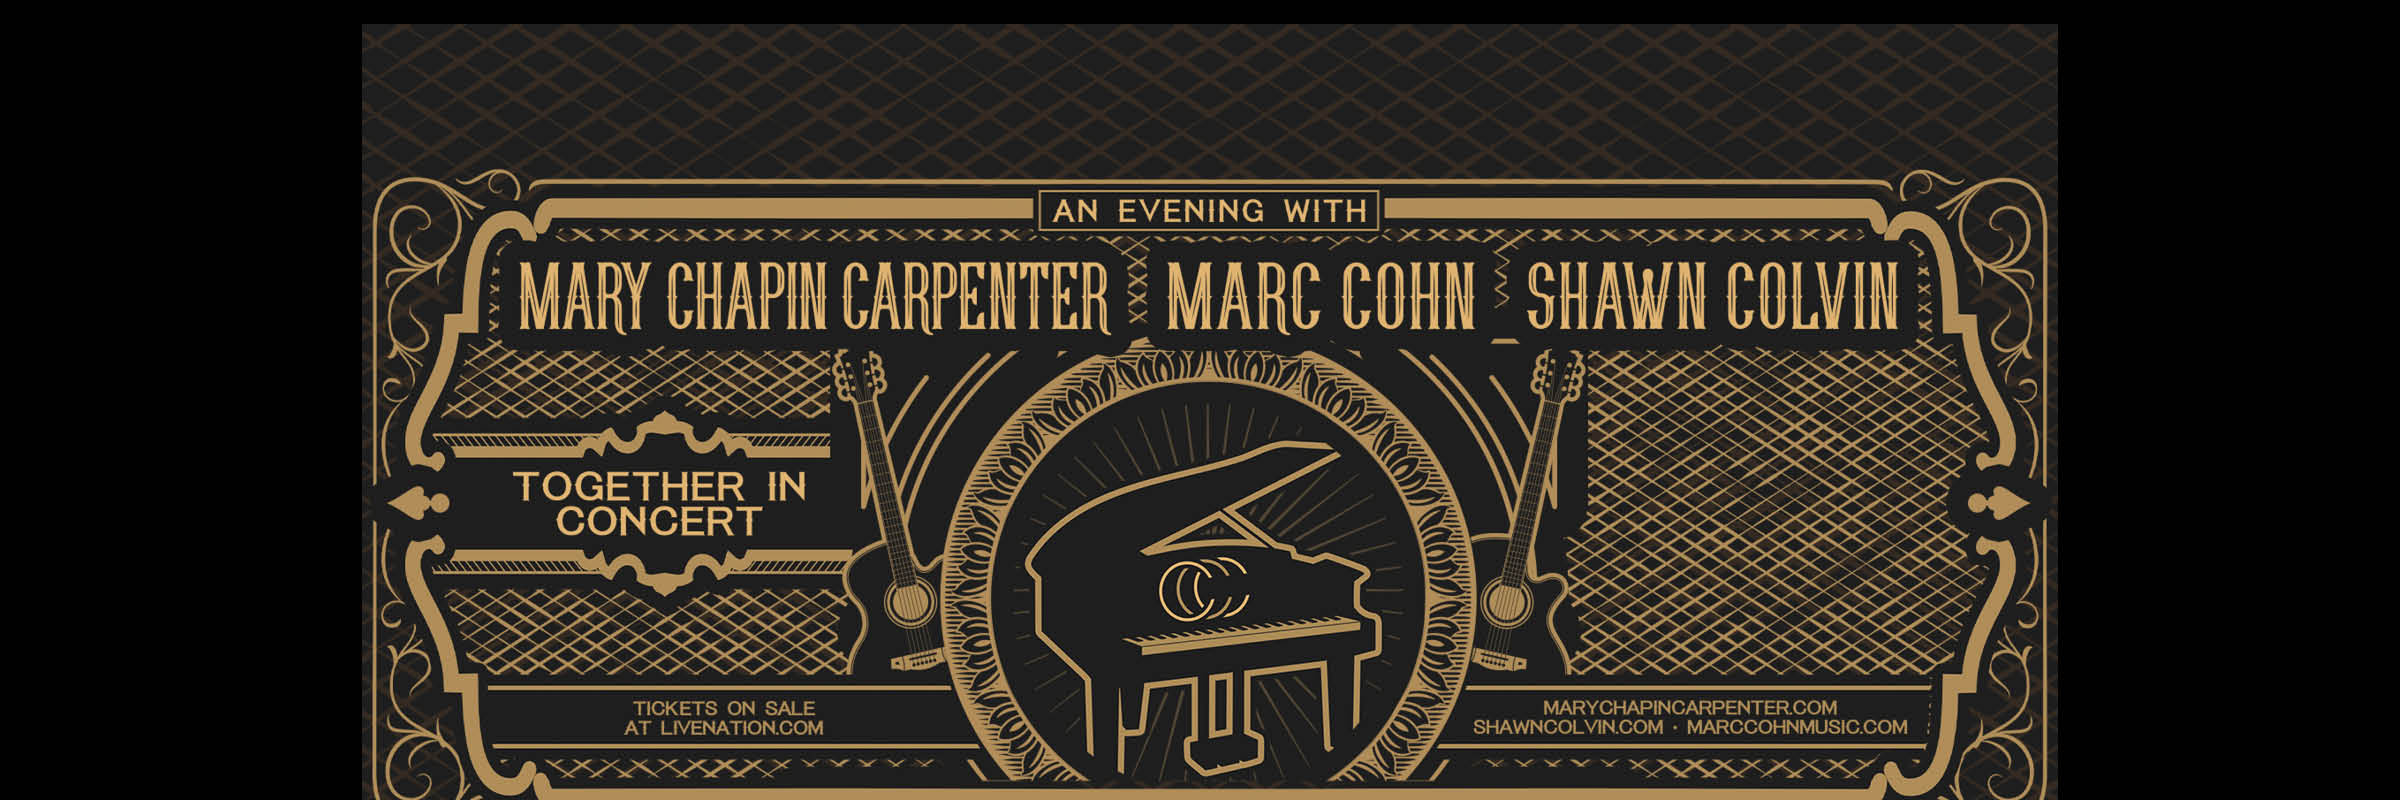 CANCELED: Mary Chapin Carpenter, Marc Cohn, Shawn Colvin: Together in Concert